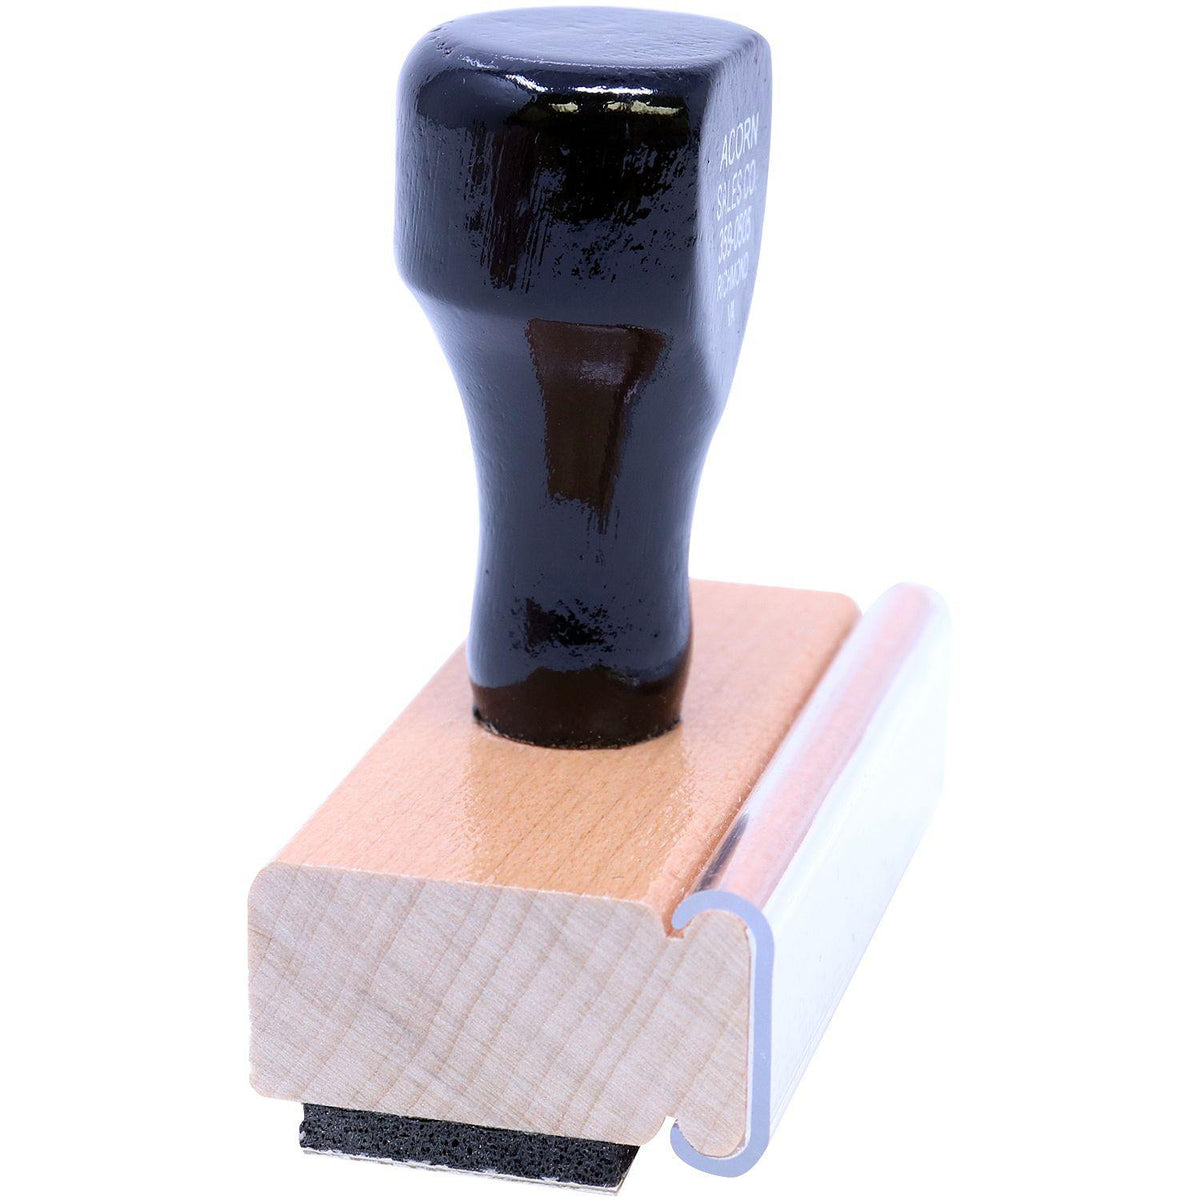 Side View of Large Atm Rubber Stamp at an Angle